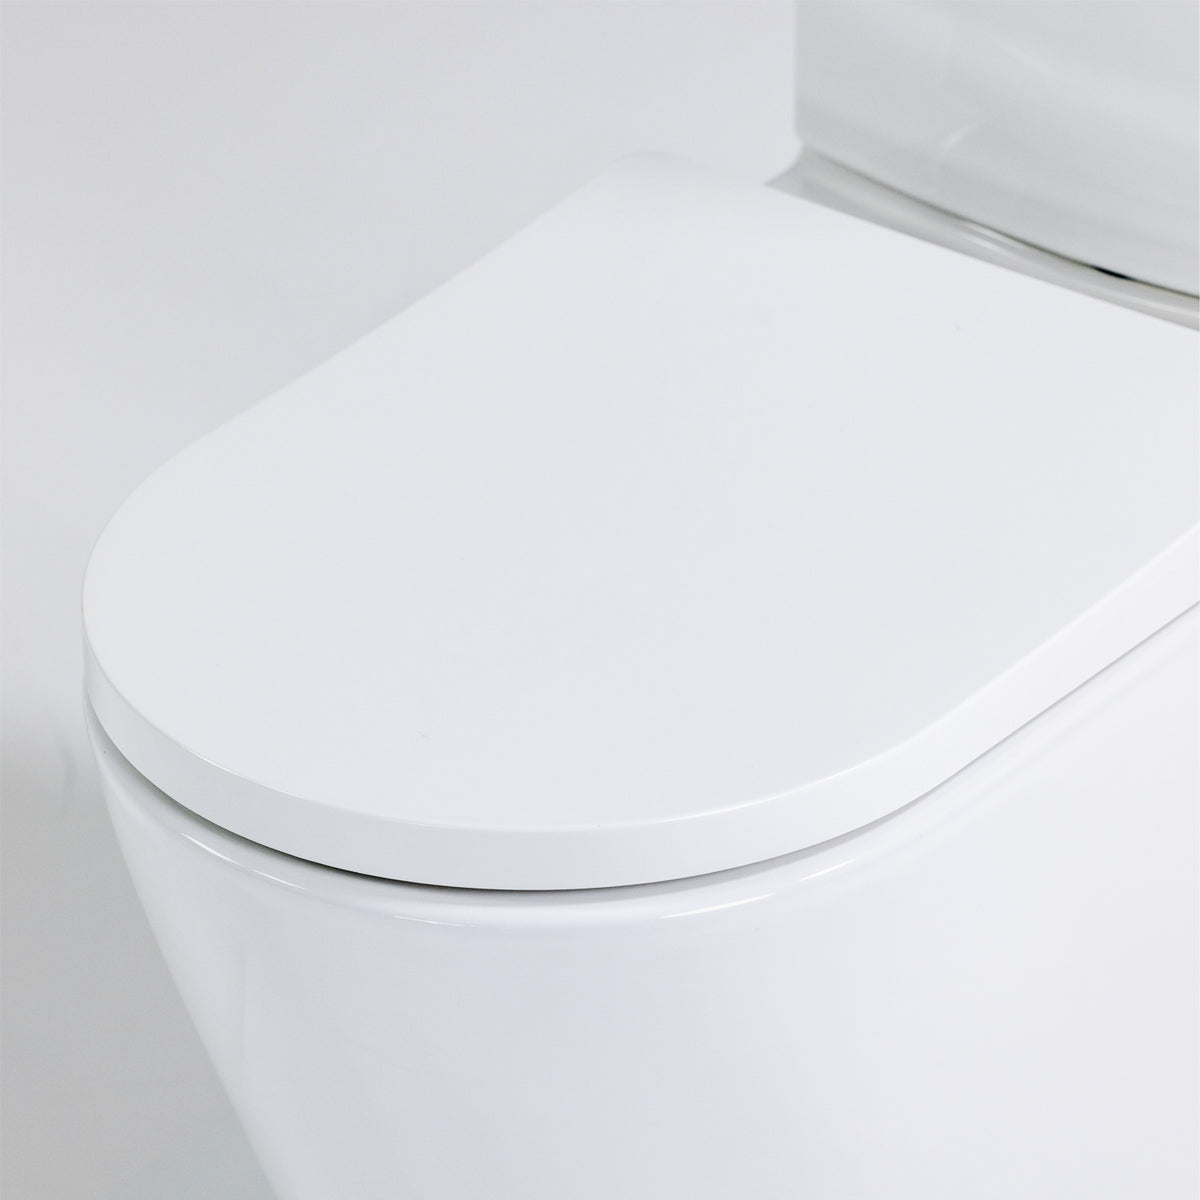 Experience the pinnacle of toilet design – Tornado V3, featuring a quiet and powerful flush, eco-friendly 4-star water efficiency, and comfort height pan.